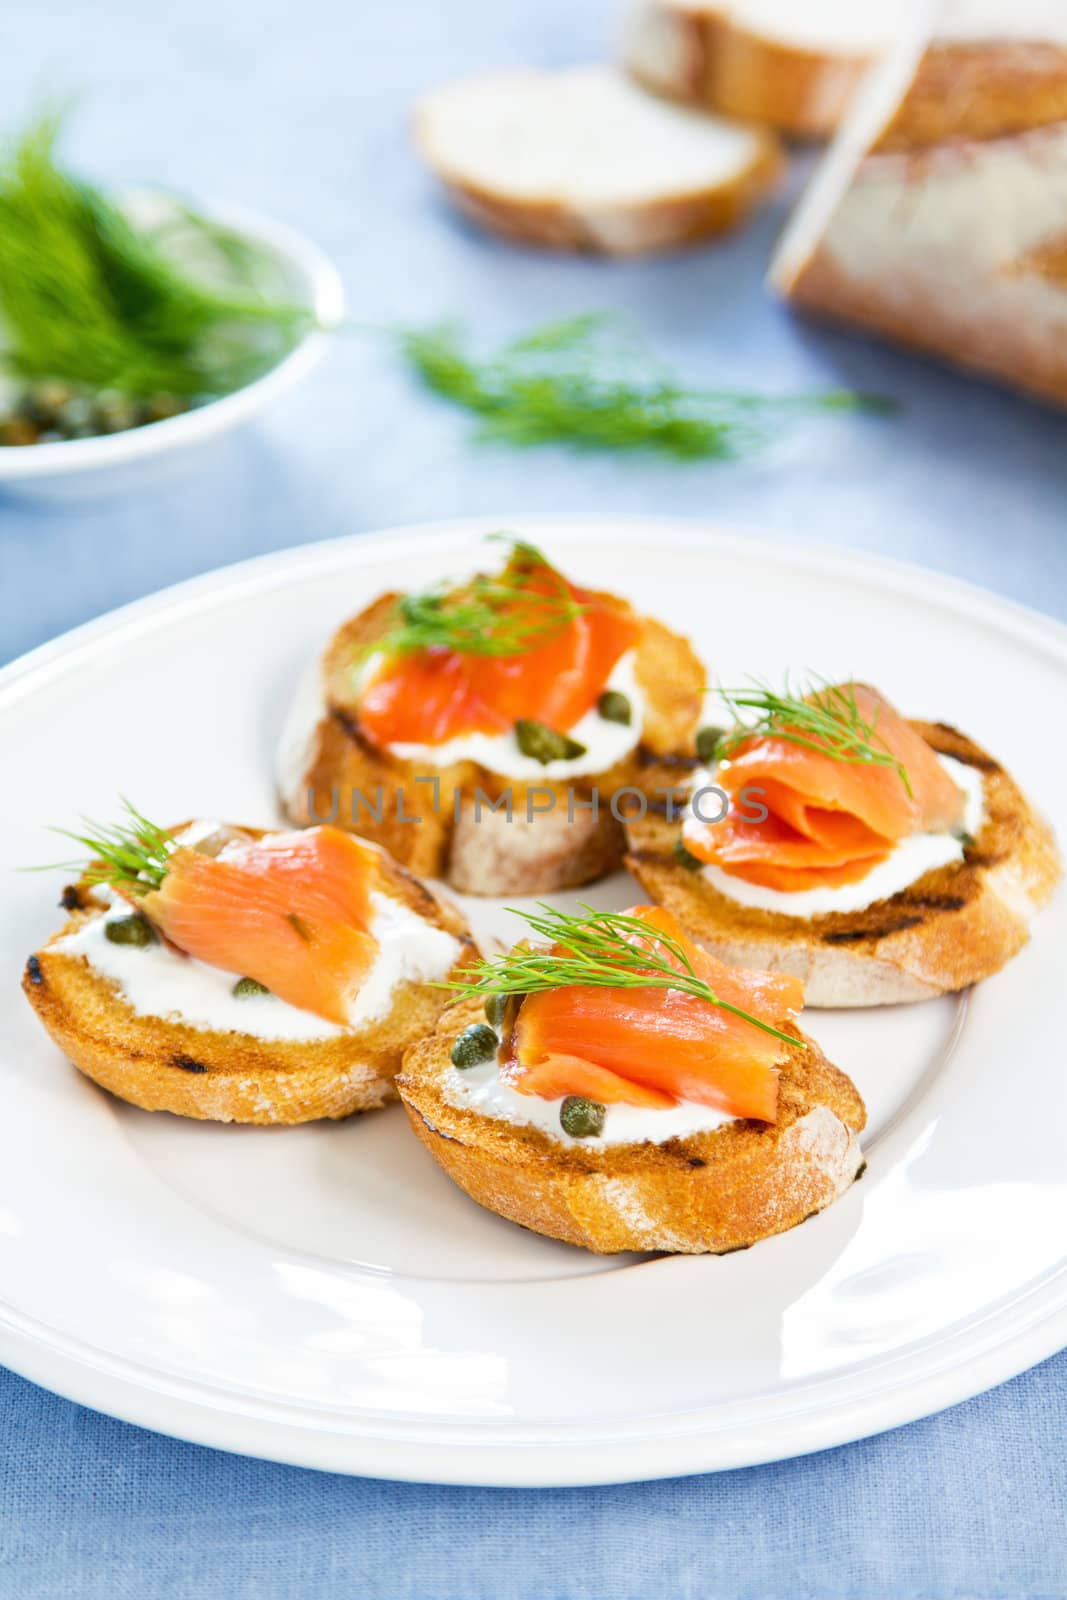 Smoked salmon crostini with cheese,caper and dill